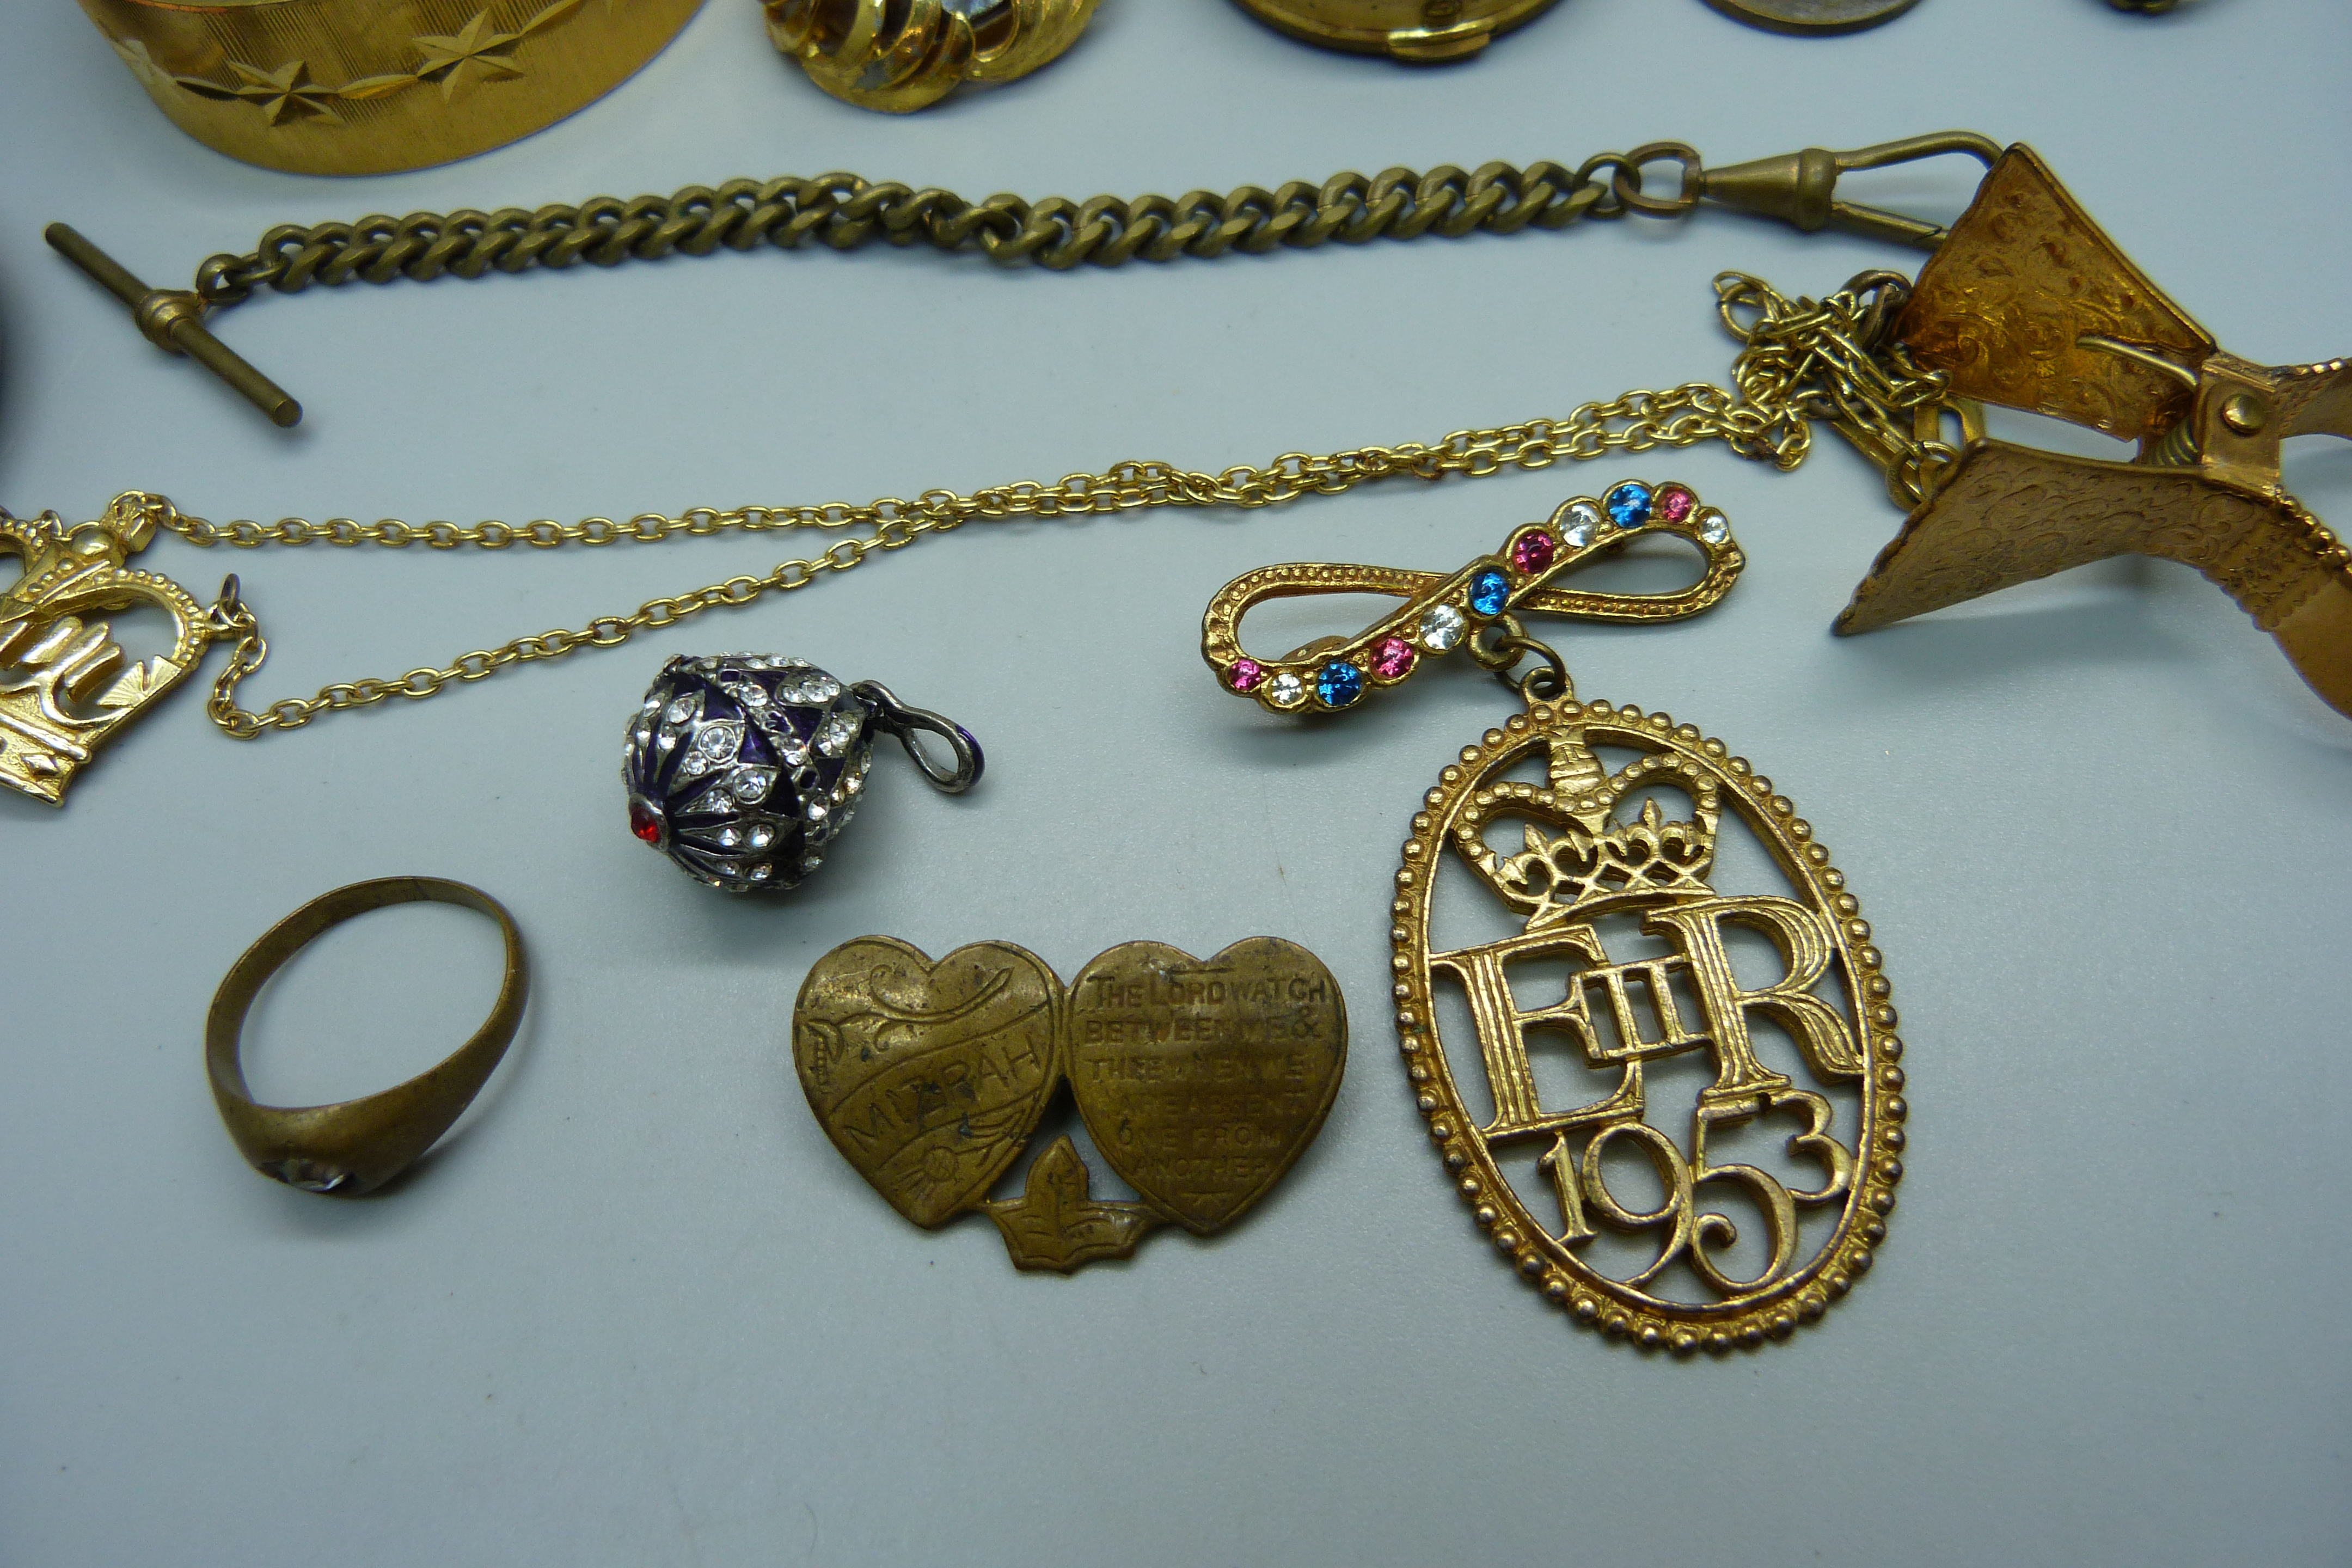 An 18ct rolled gold bracelet, a Guilloche enamel pin tray, vintage jewellery, etc. - Image 2 of 3